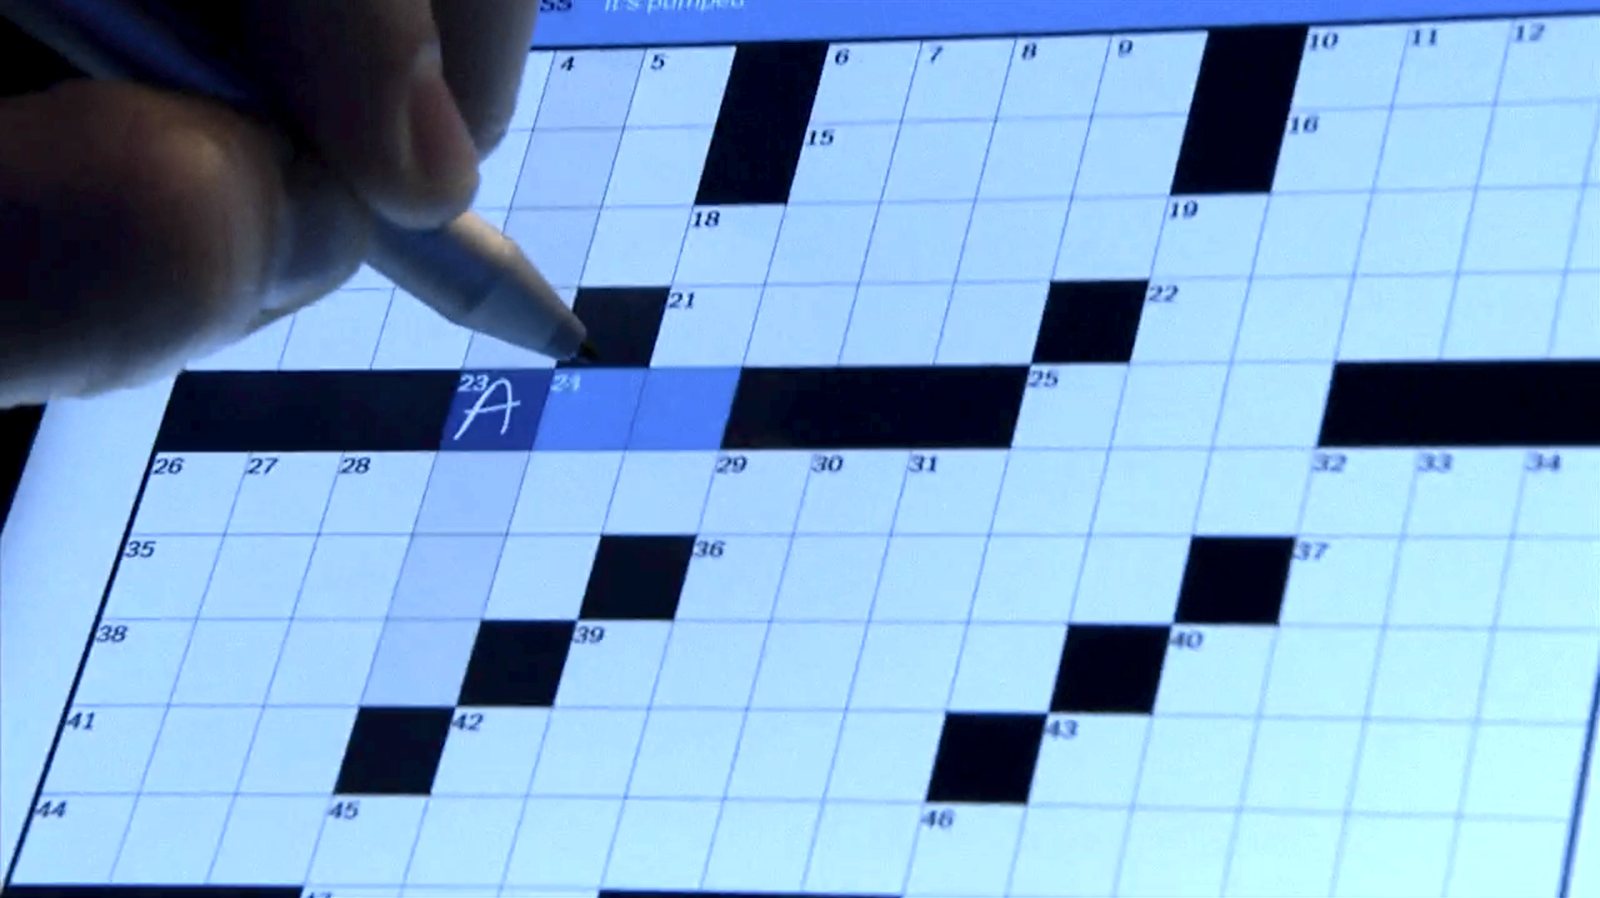 Panos Panay writes the letter ‘A’ into a box on a crossword.